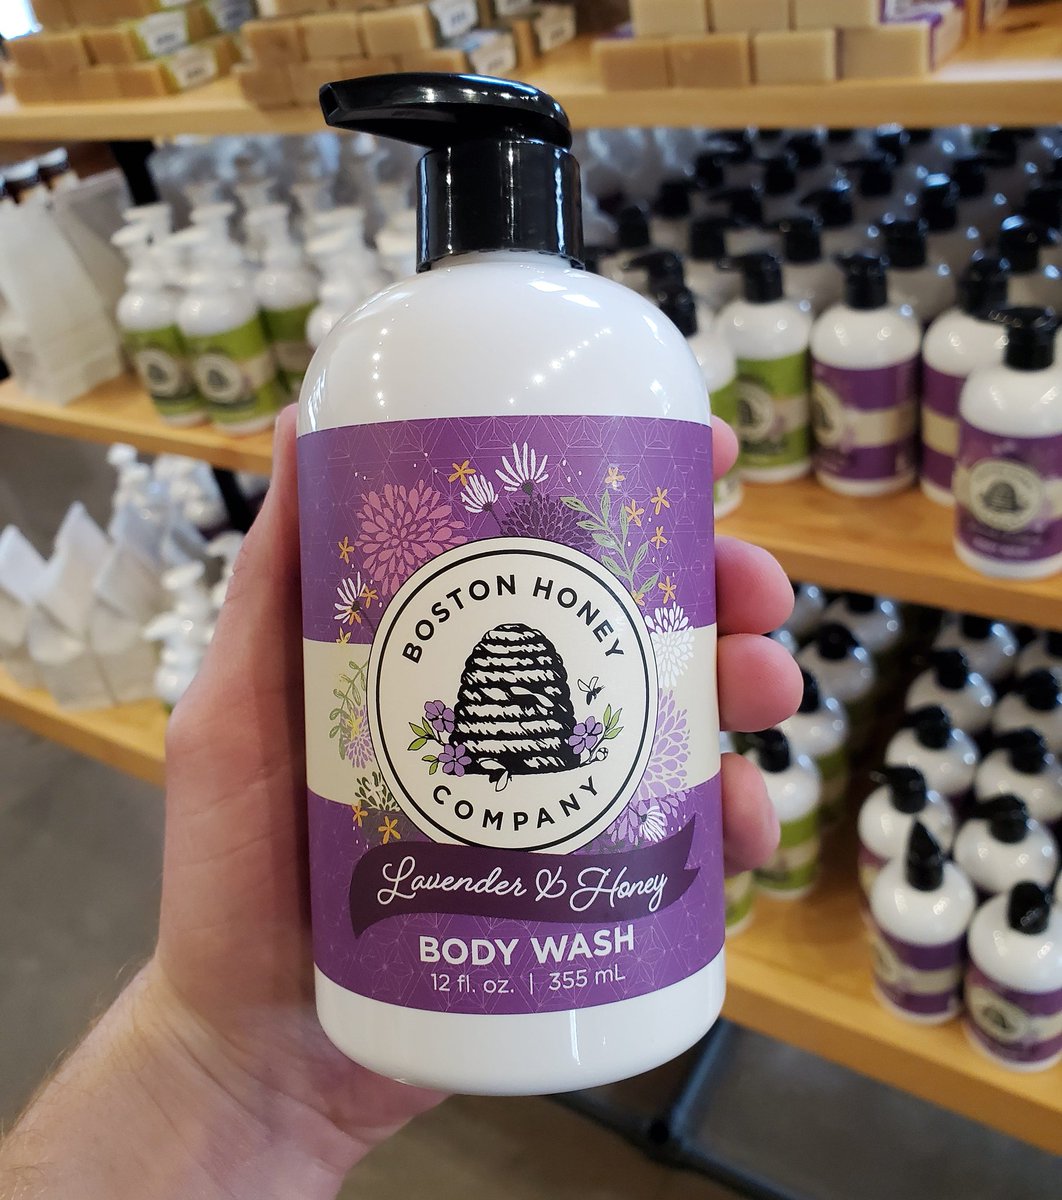 Woah! Our new body wash and foaming handsoap are now available at the @BosPublicMarket and on @SourceWhatsGood! #shoplocal #soap #skincare